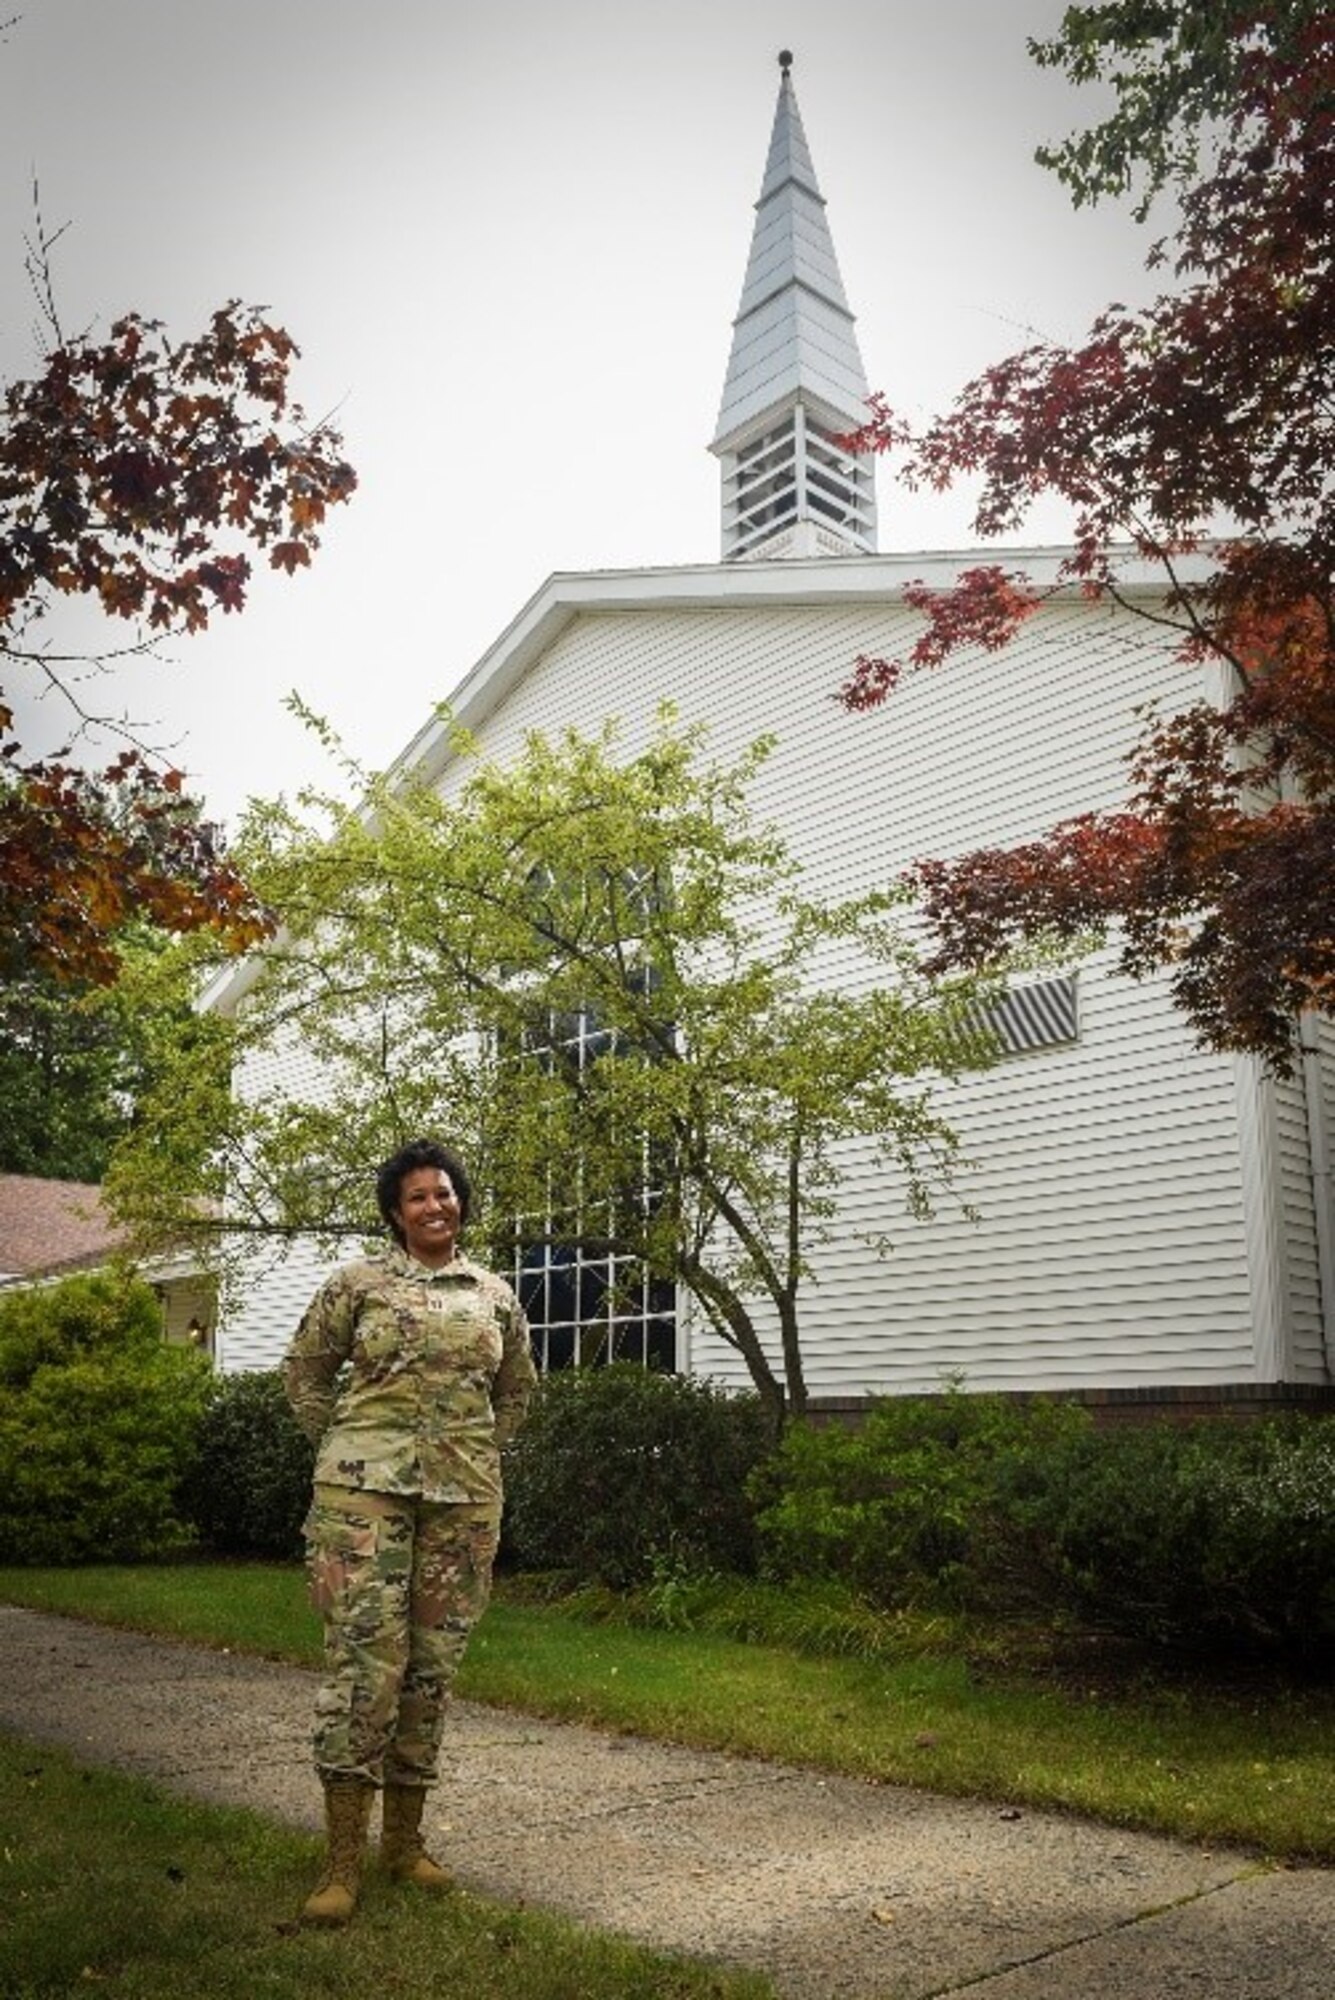 Chaplain (Capt.) Kimberly Hall, installation chaplain, stands outside the installation chapel